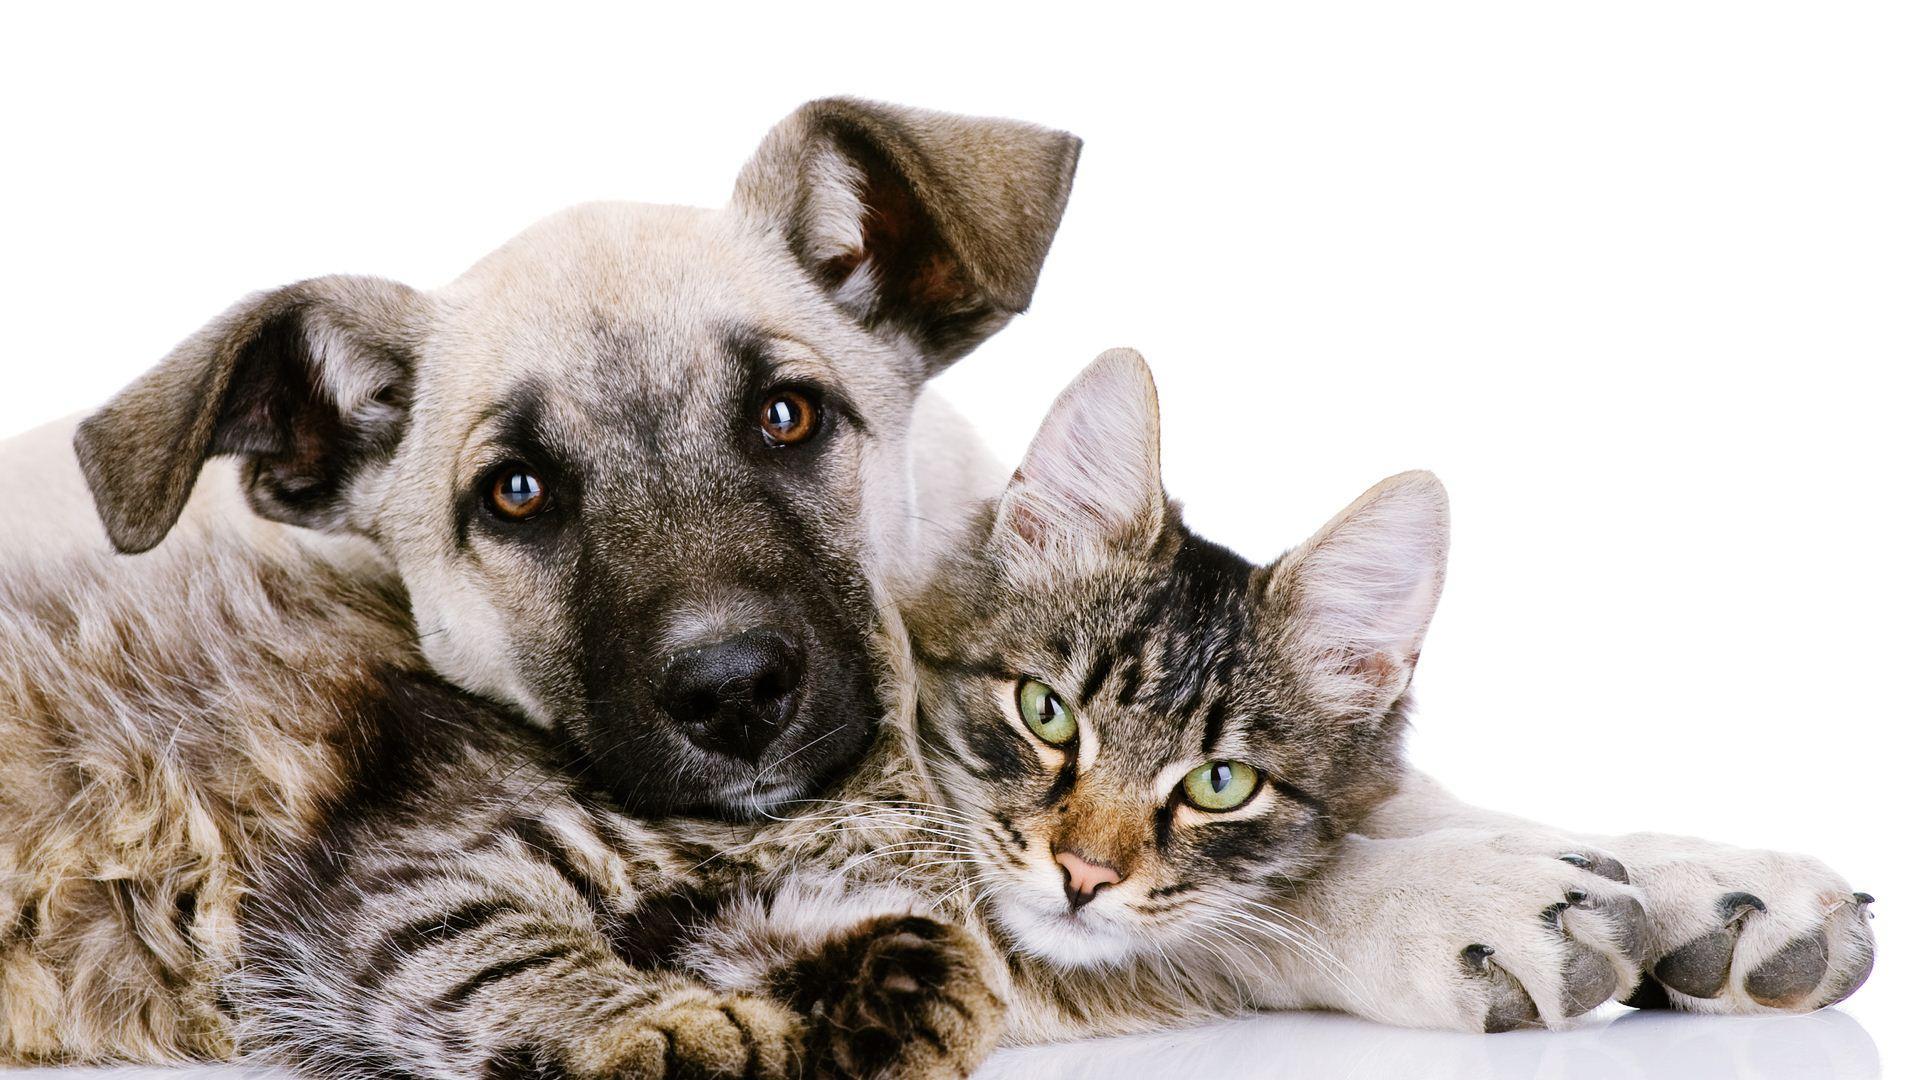 image For > Cats And Dog Wallpaper